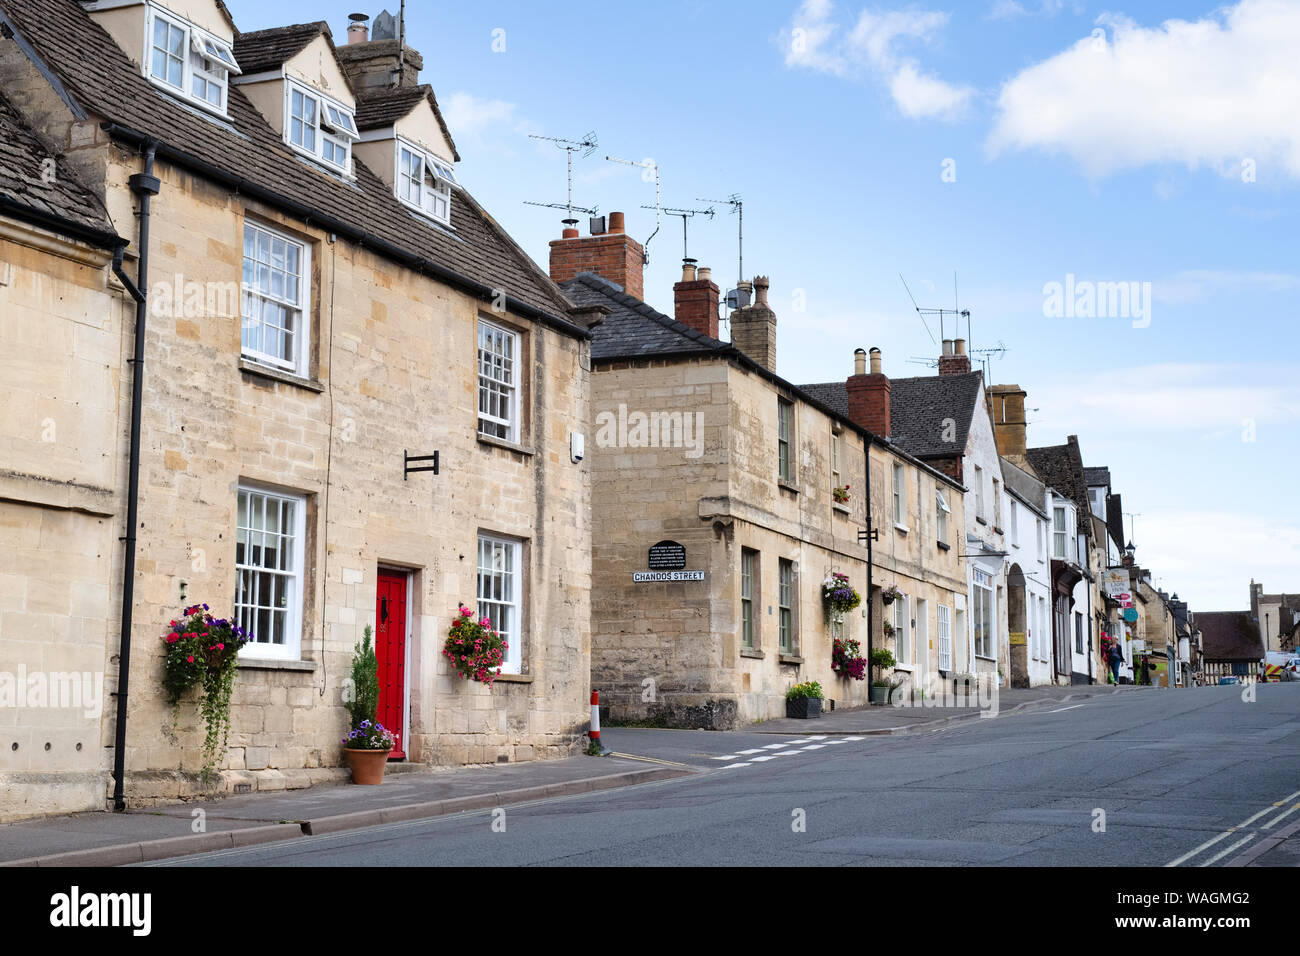 Cotswold stone buildings along Gloucester Street Winchcombe, Gloucestershire, England Stock Photo